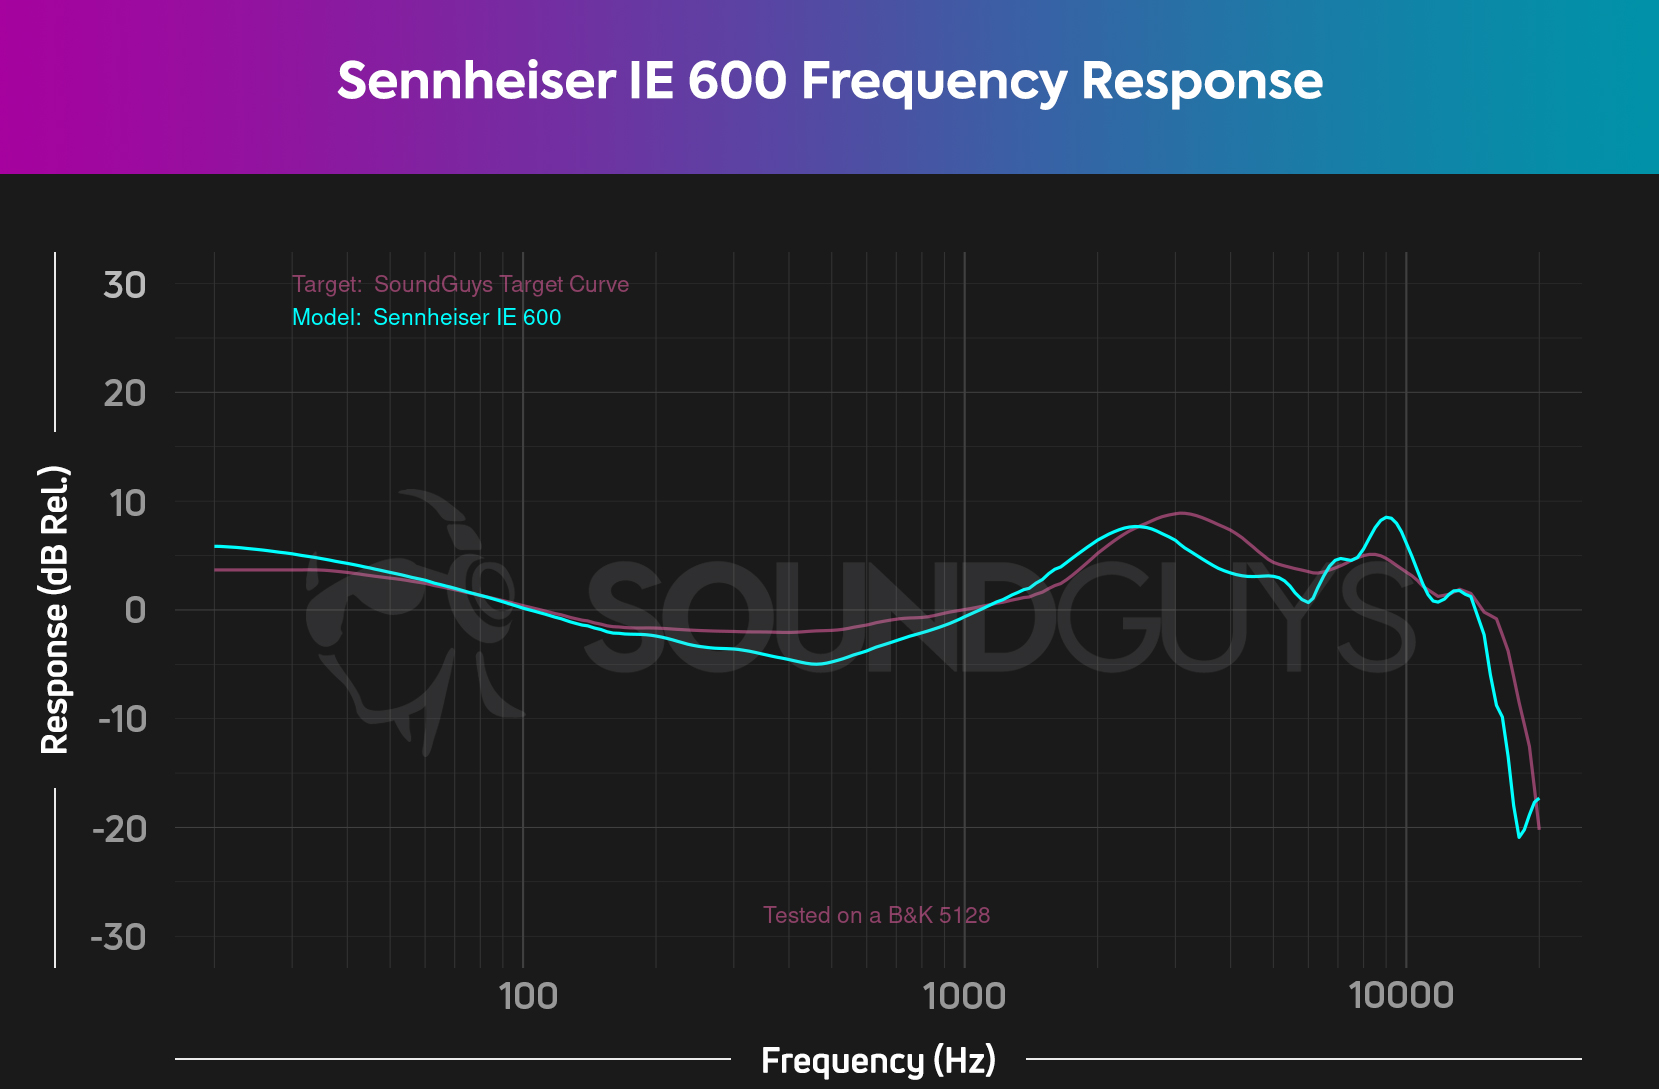 A chart shows the frequency response of the Sennheiser IE 600 following the SoundGuys target curve closely.